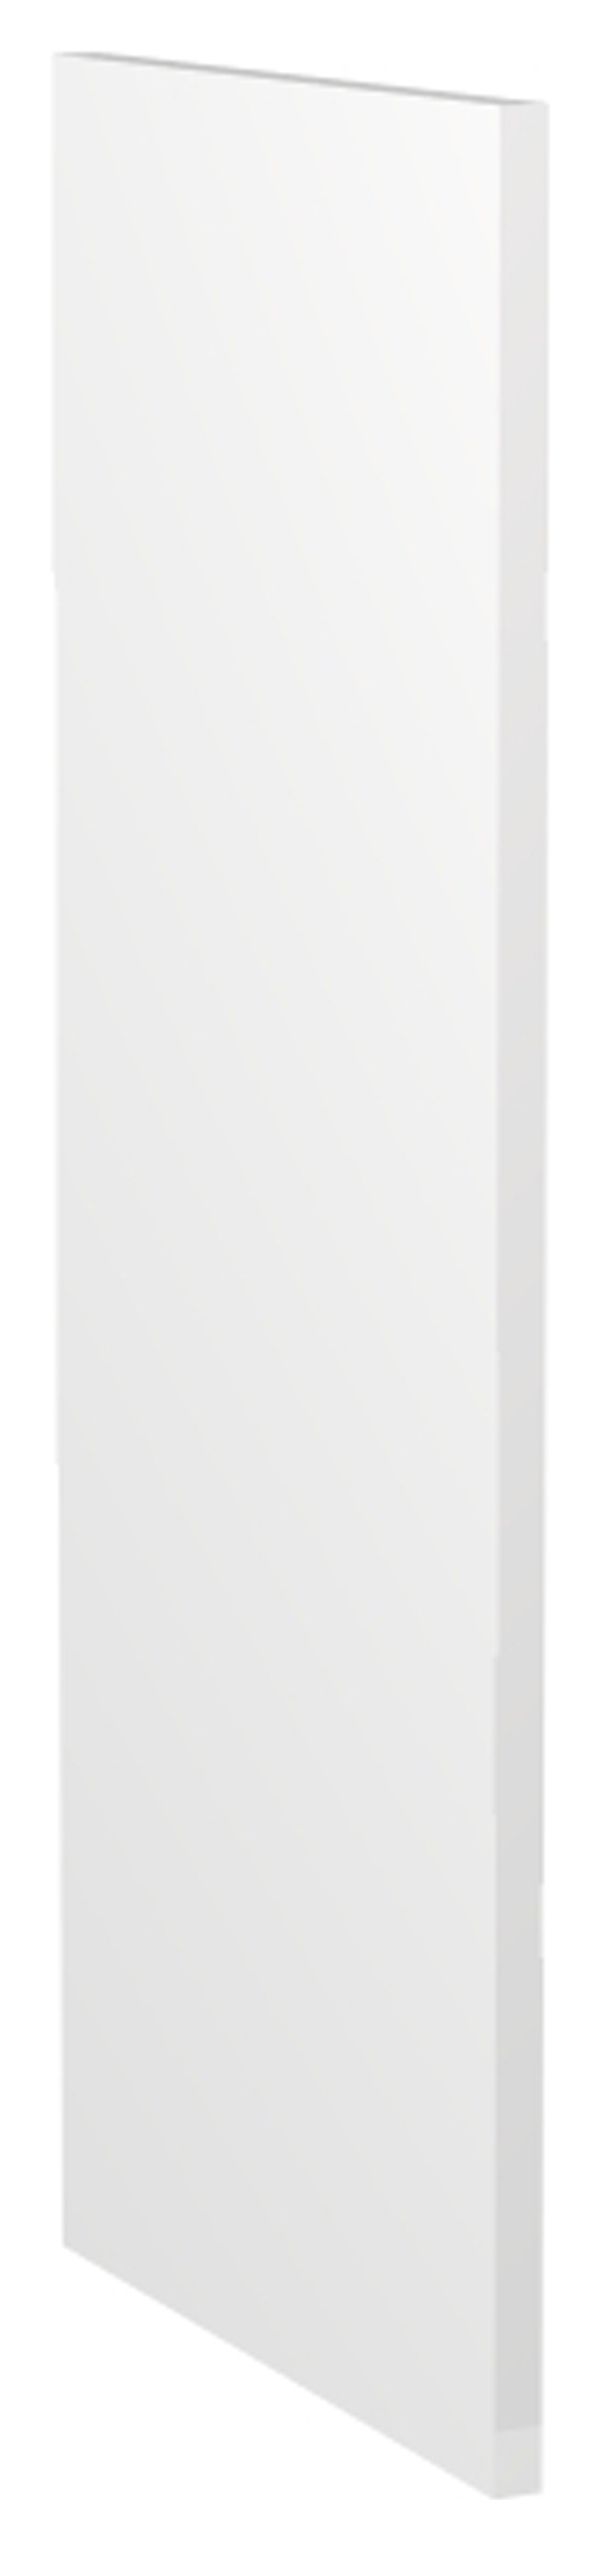 Image of Wickes Vermont Gloss White Wall Decor End Panel - 18mm